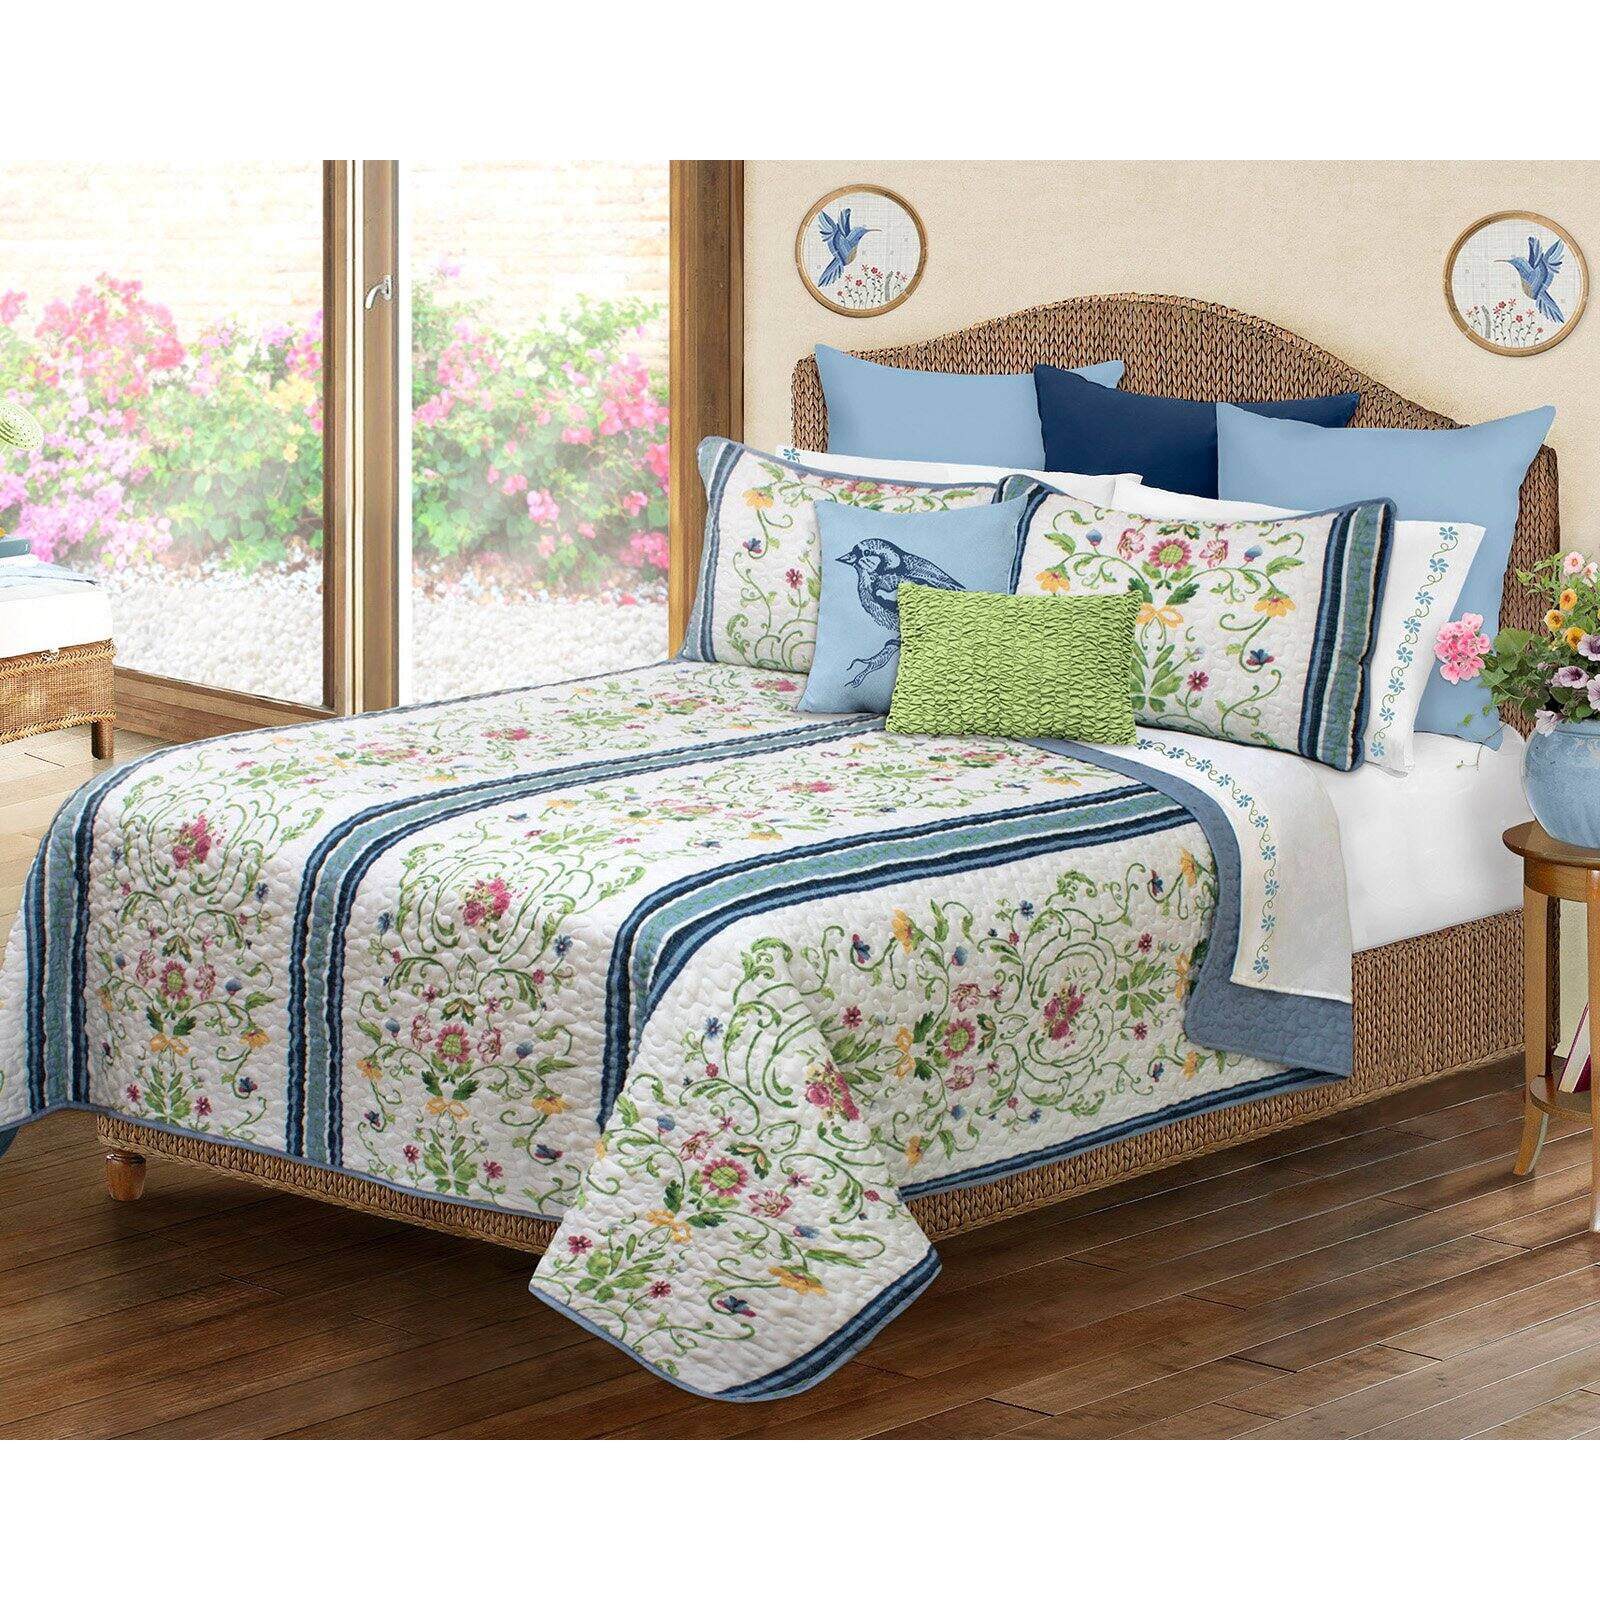 Details about   Queen Quilt Set Comforter Bedding Cover Pillow Shams Bird On Wire Floral Print 